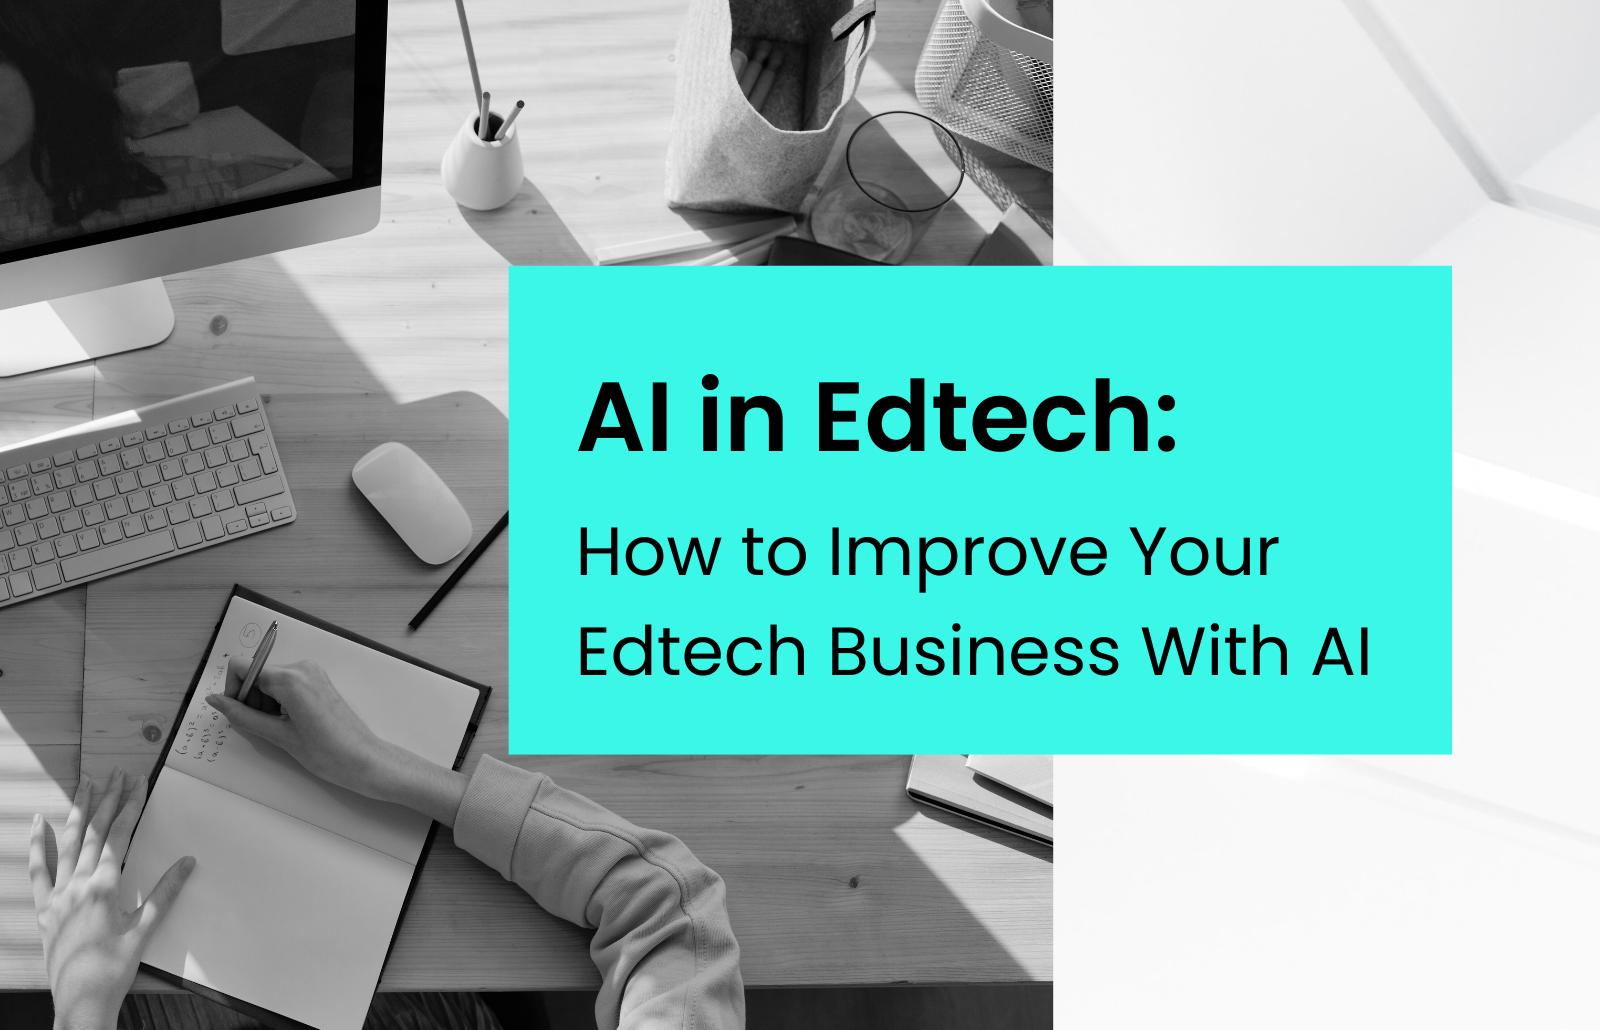 AI in Edtech: How to Improve Your Edtech Business With AI